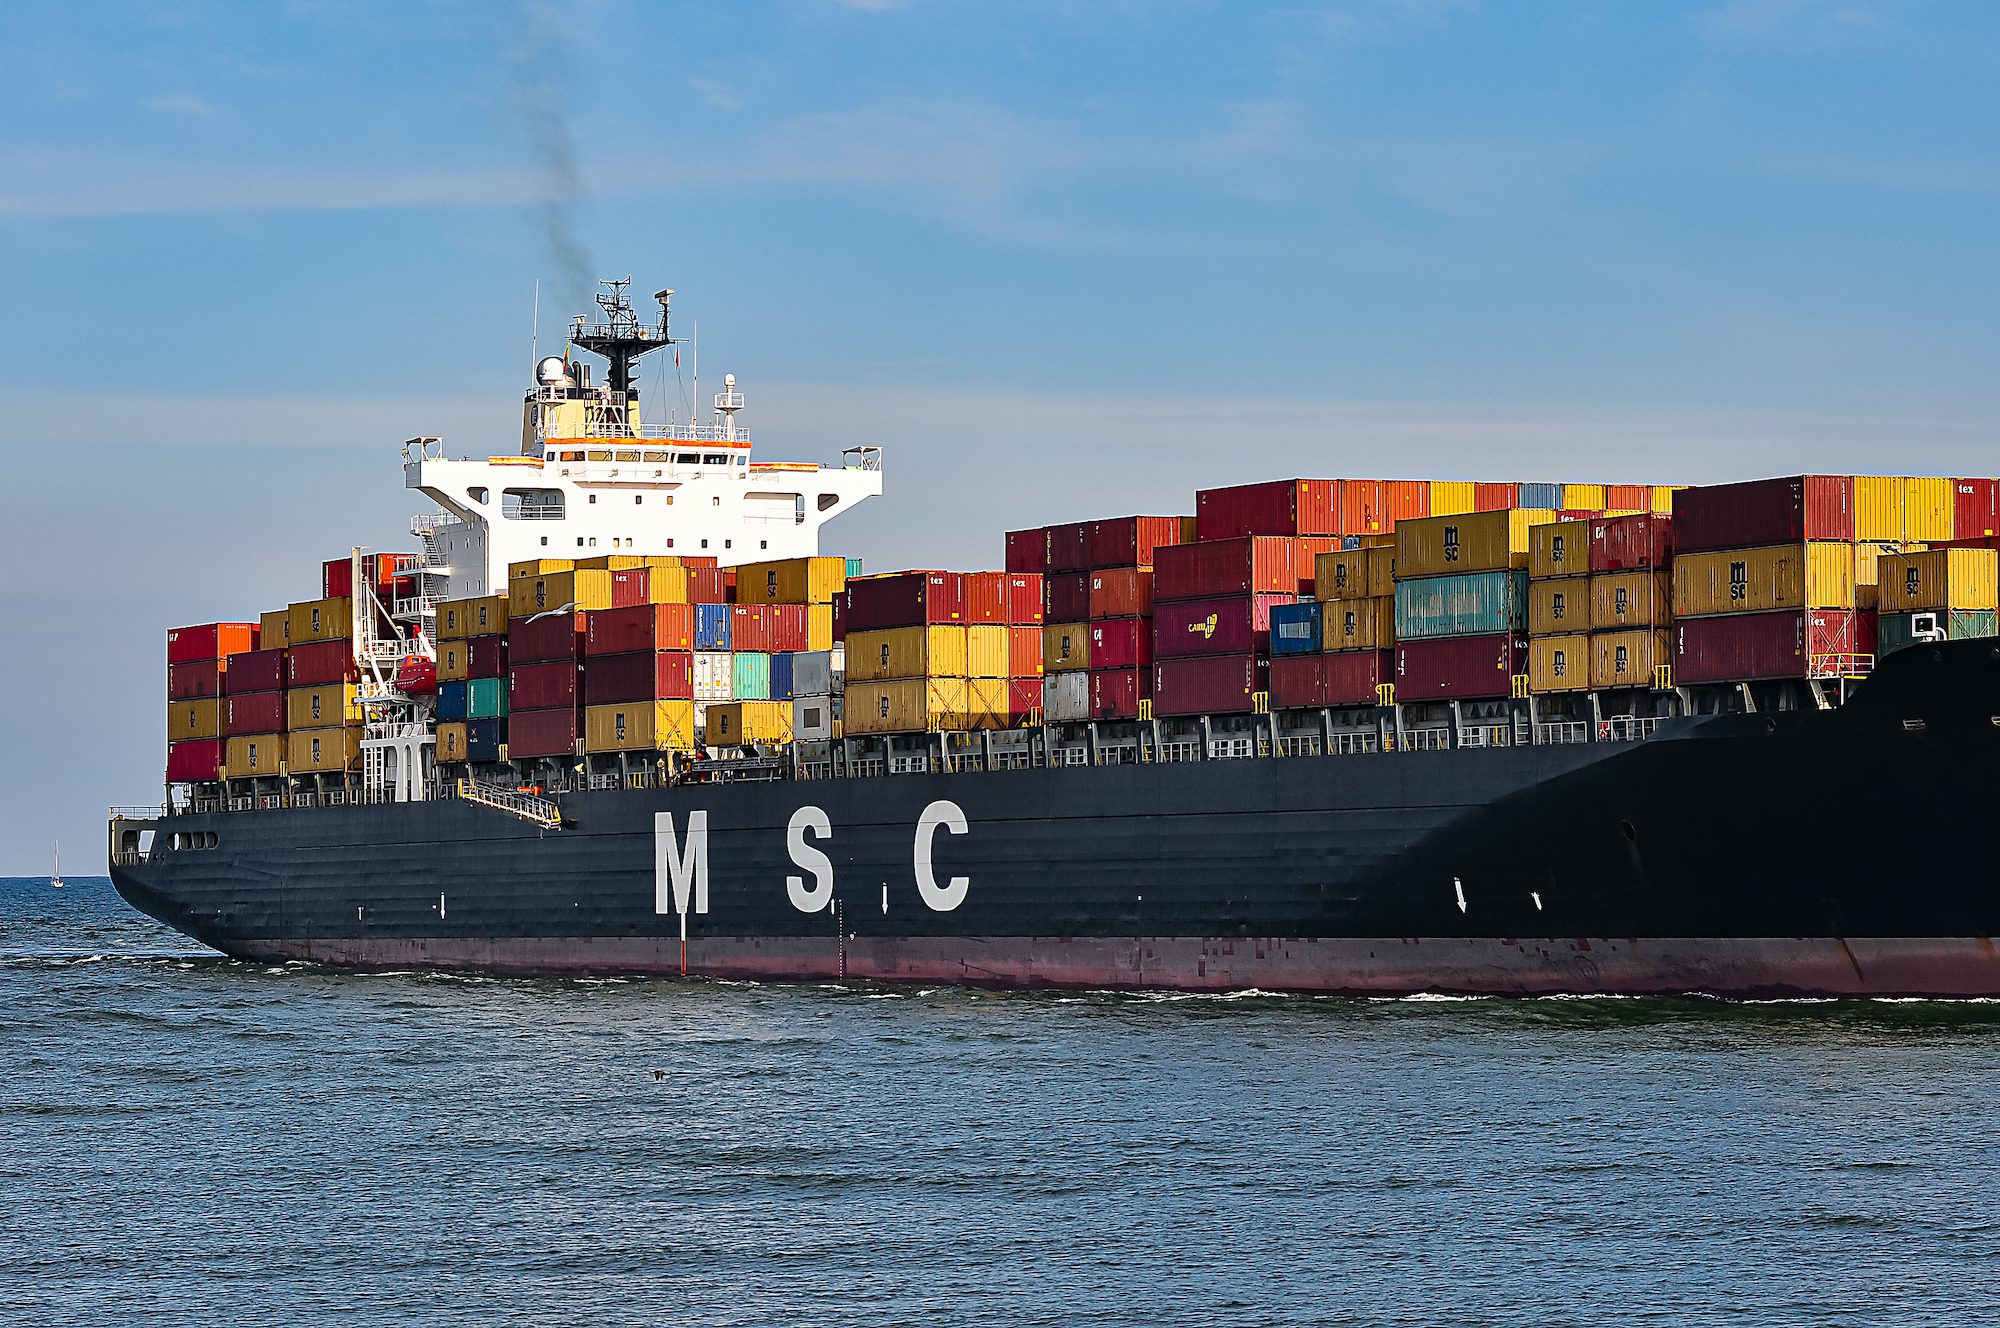 Stock image of an MSC containership